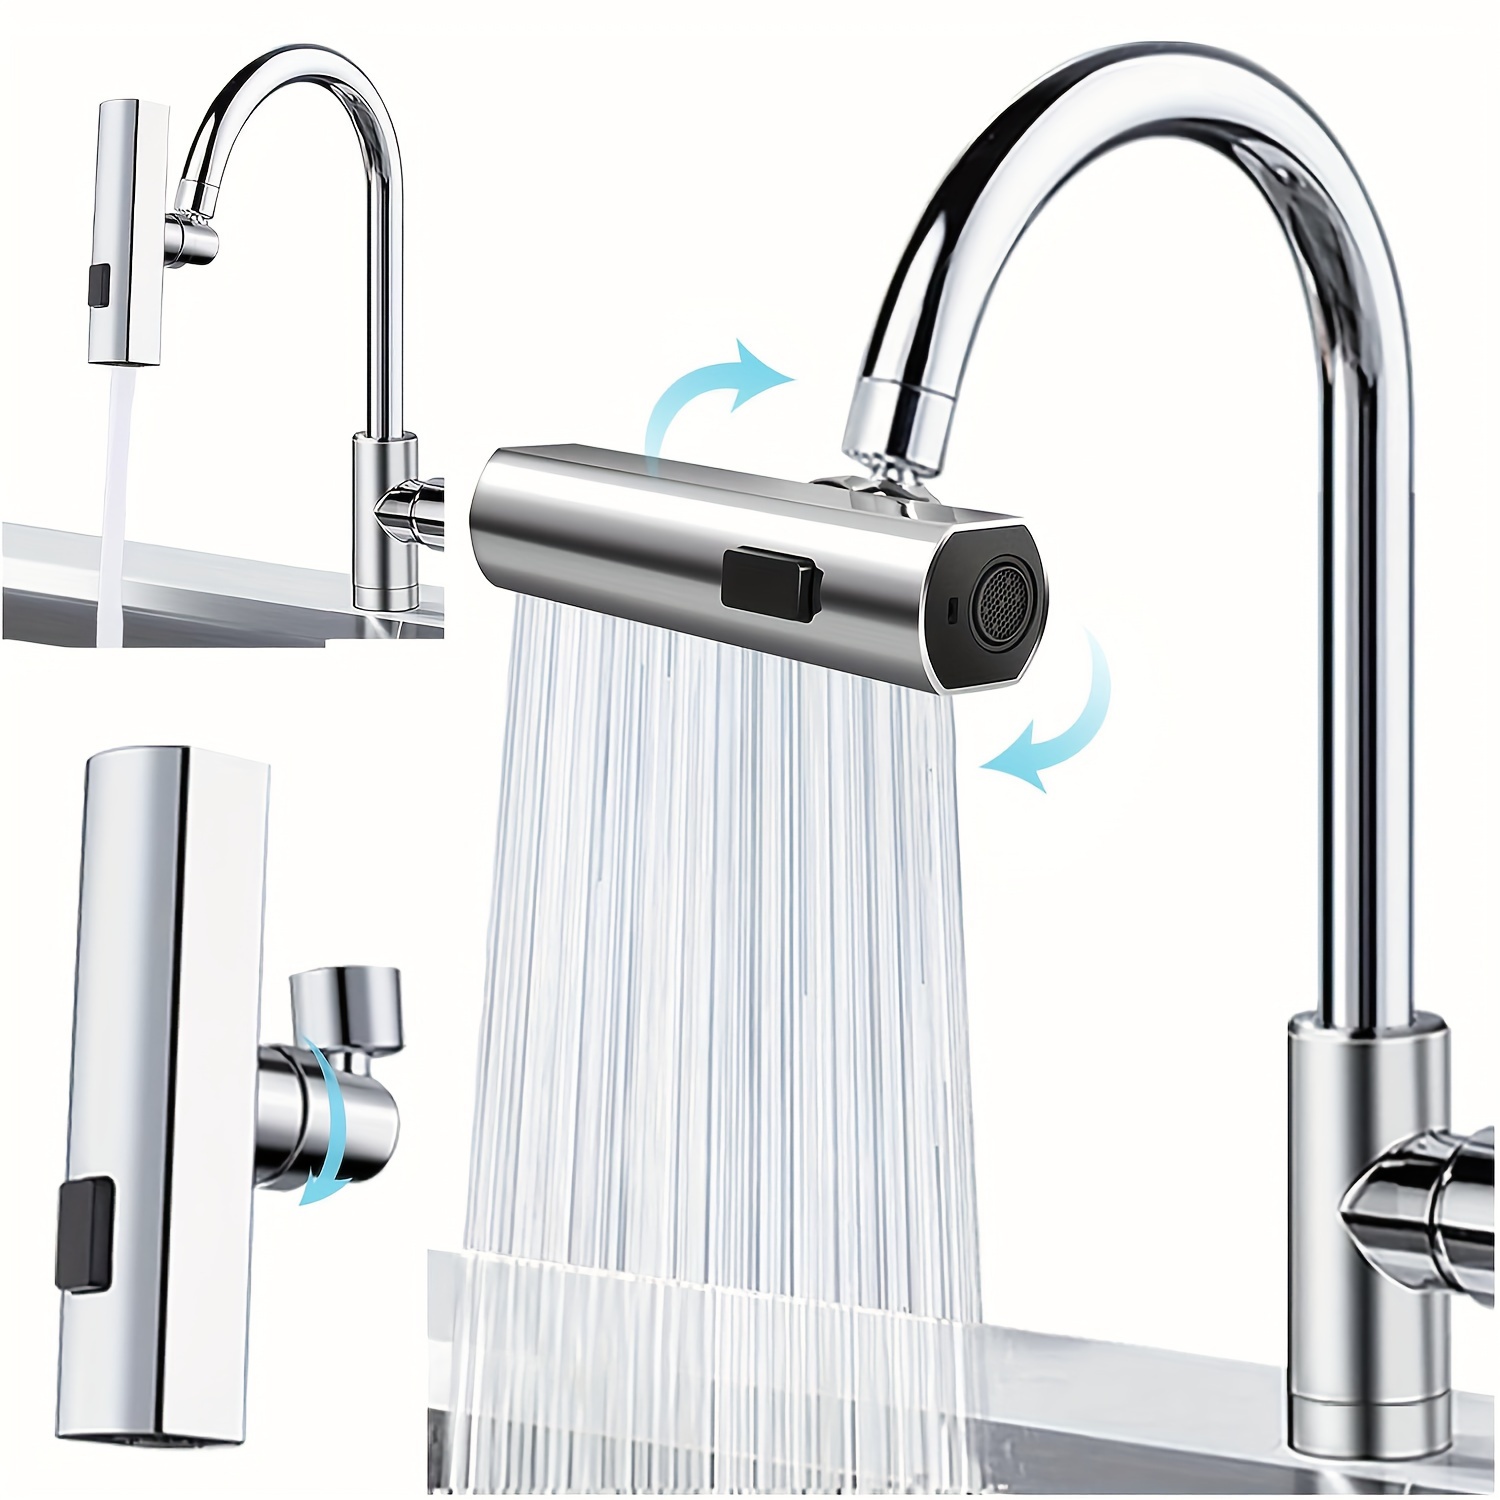 3 in 1 360° Waterfall Kitchen Faucet, Touch Kitchen Faucets, Faucet Extender for Kitchen Sink, Swivel Waterfall Kitchen Faucet for Washing Vegetable Fruit details 1